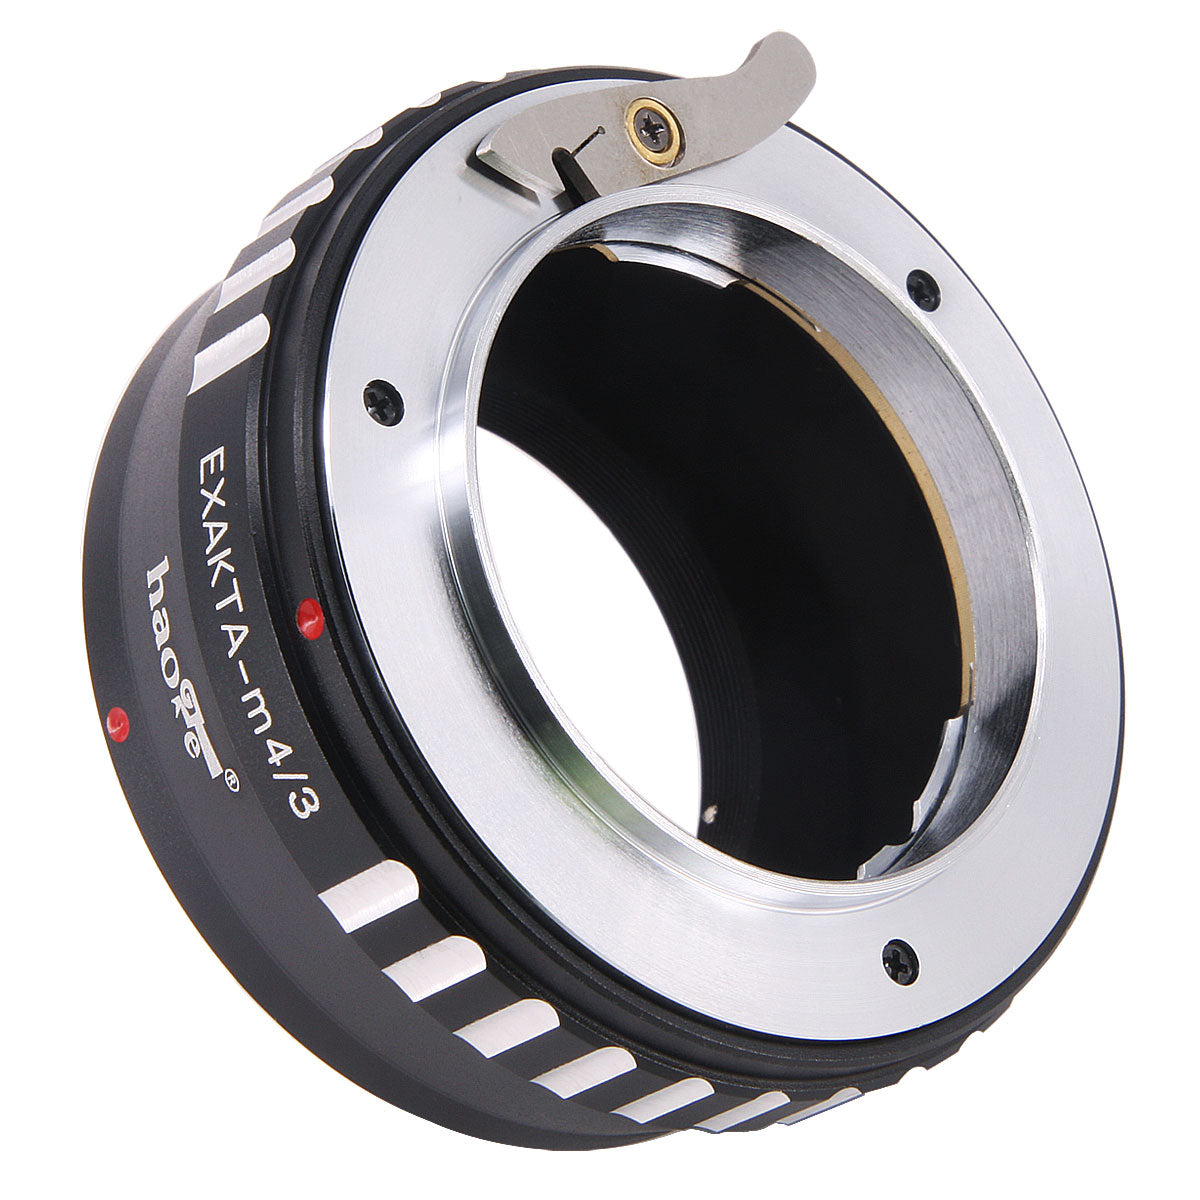 Haoge Manual Lens Mount Adapter for Exakta EXA mount Lens to Olympus and Panasonic Micro Four Thirds MFT M4/3 M43 Mount Camera